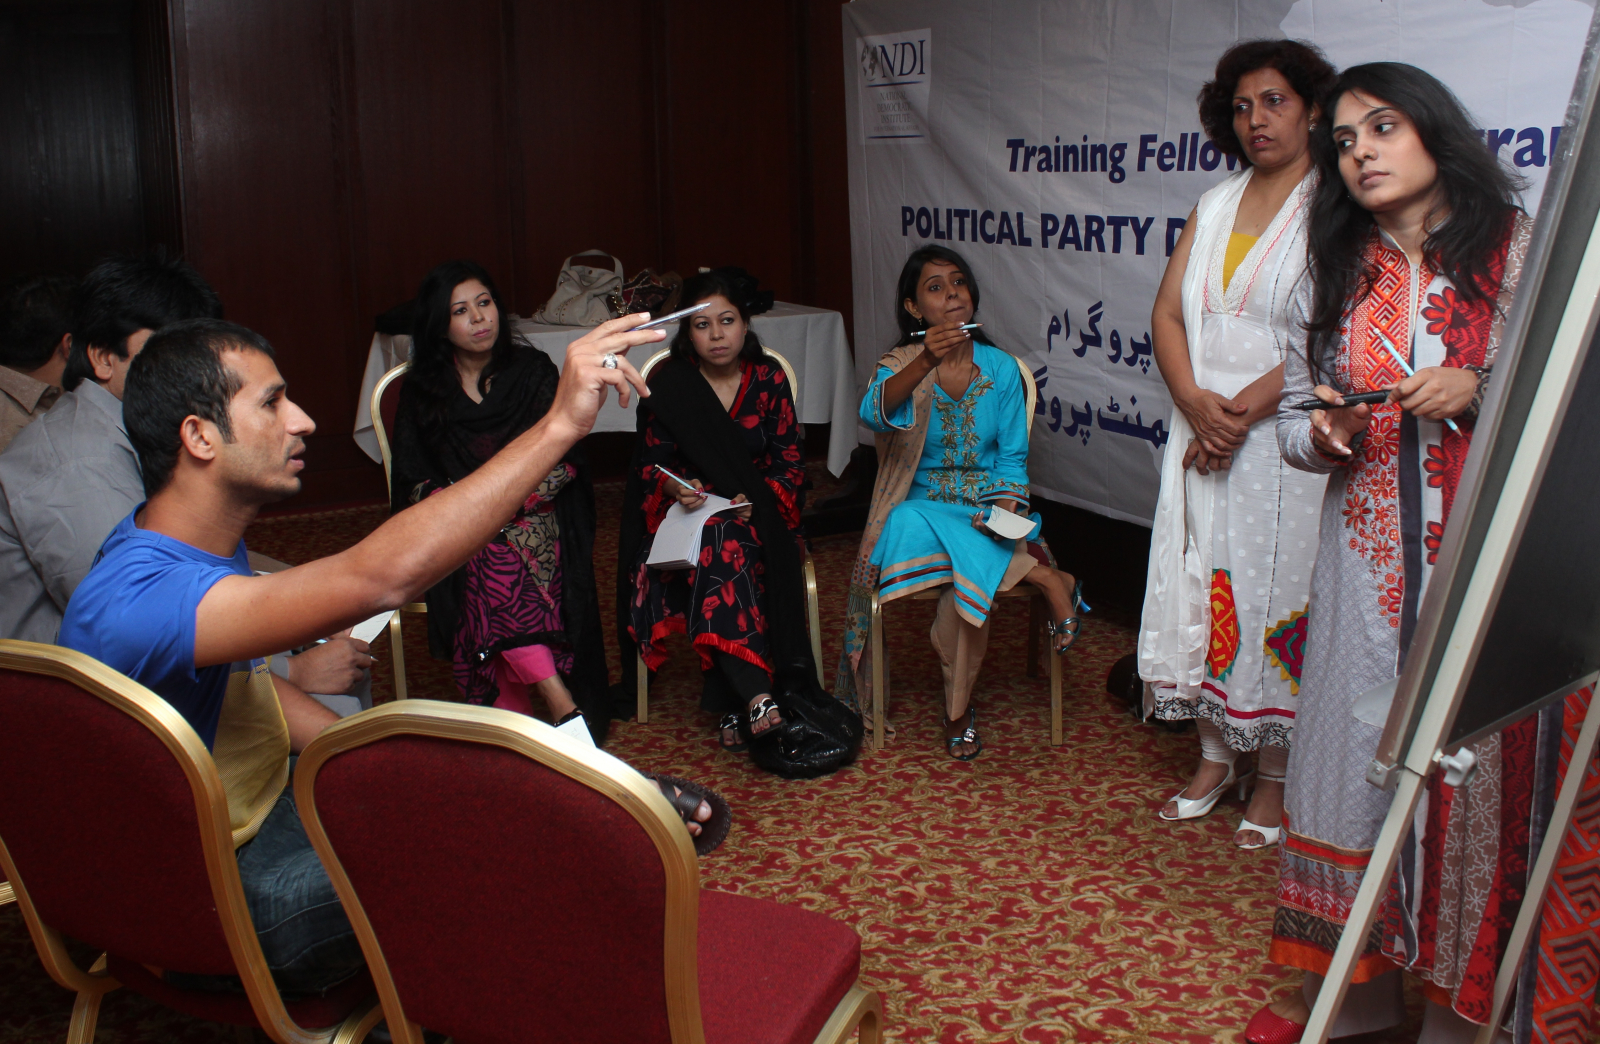 Political Parties Engage Citizens Online for Responsive Policy in Pakistan